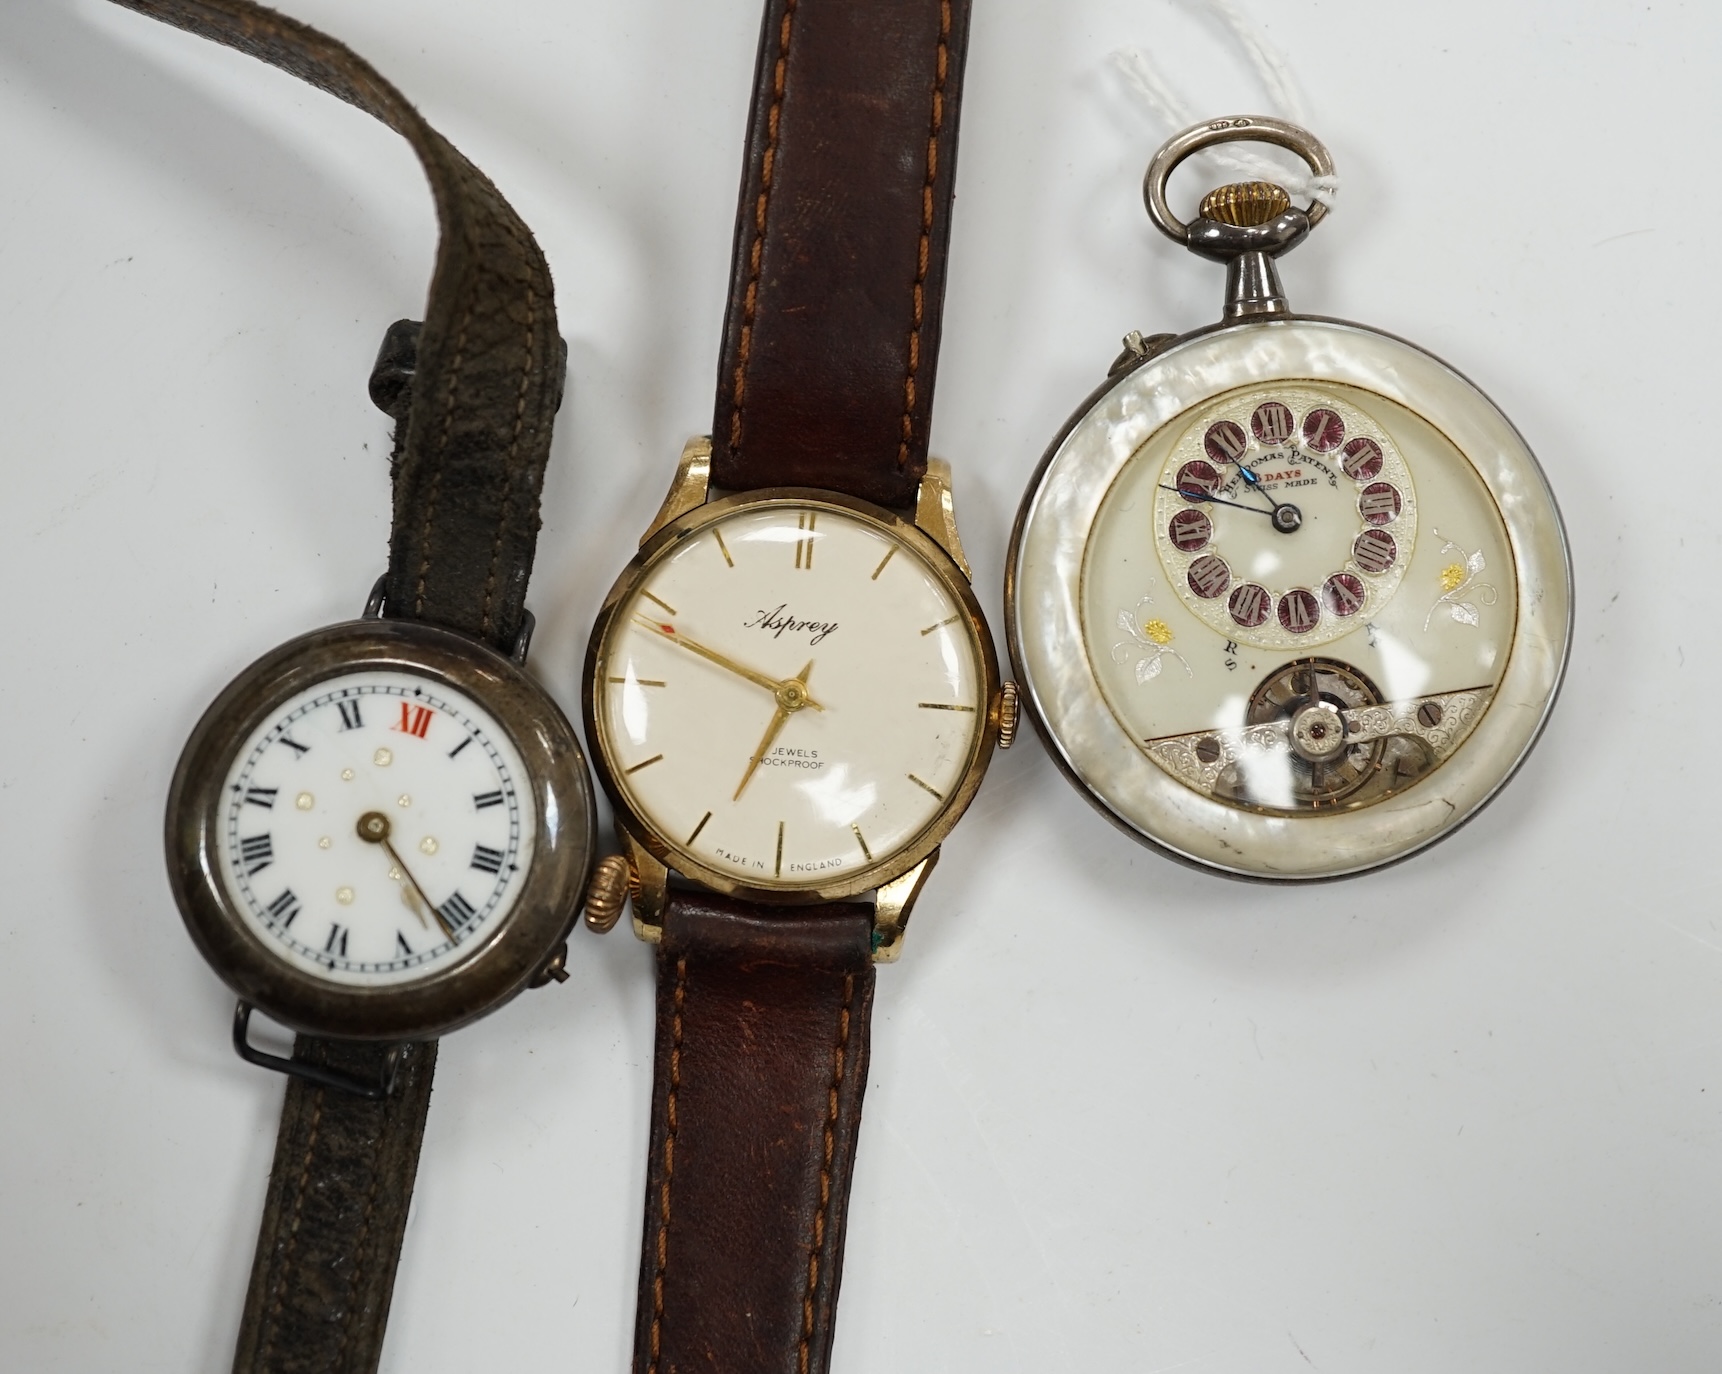 A gentleman's 9ct gold manual wind wrist watch, retailed by Asprey, together with a silver wrist watch and a mother of pearl cased Hebdomas pocket watch. Condition - poor to fair